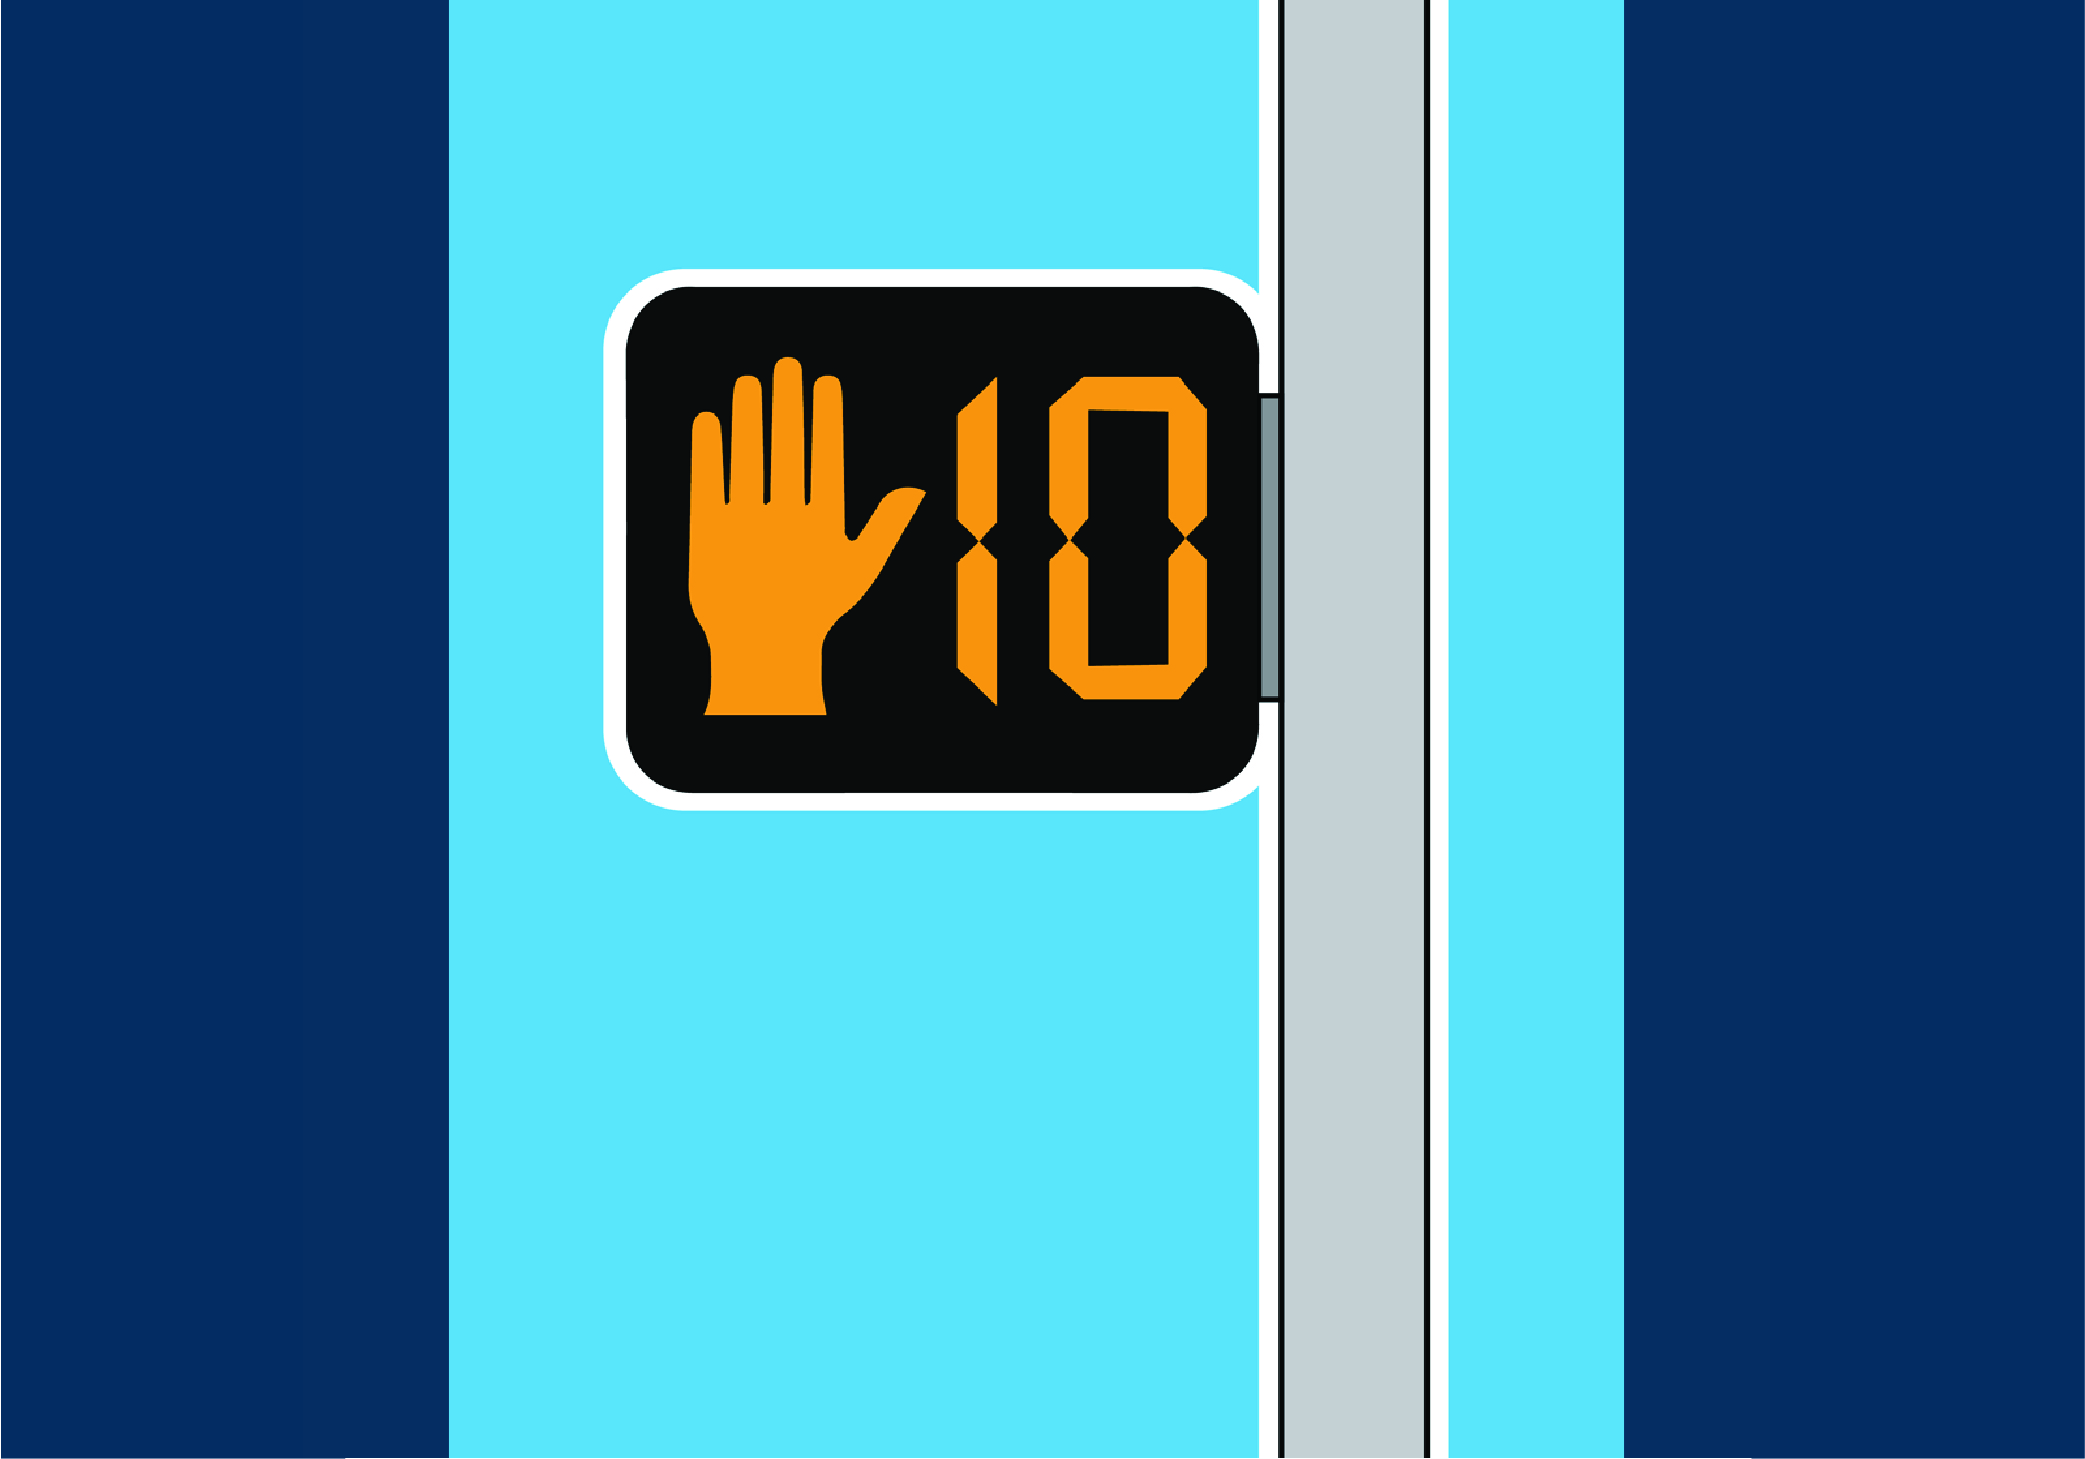 Rendering of pedestrian countdown signal with red hand and number 10